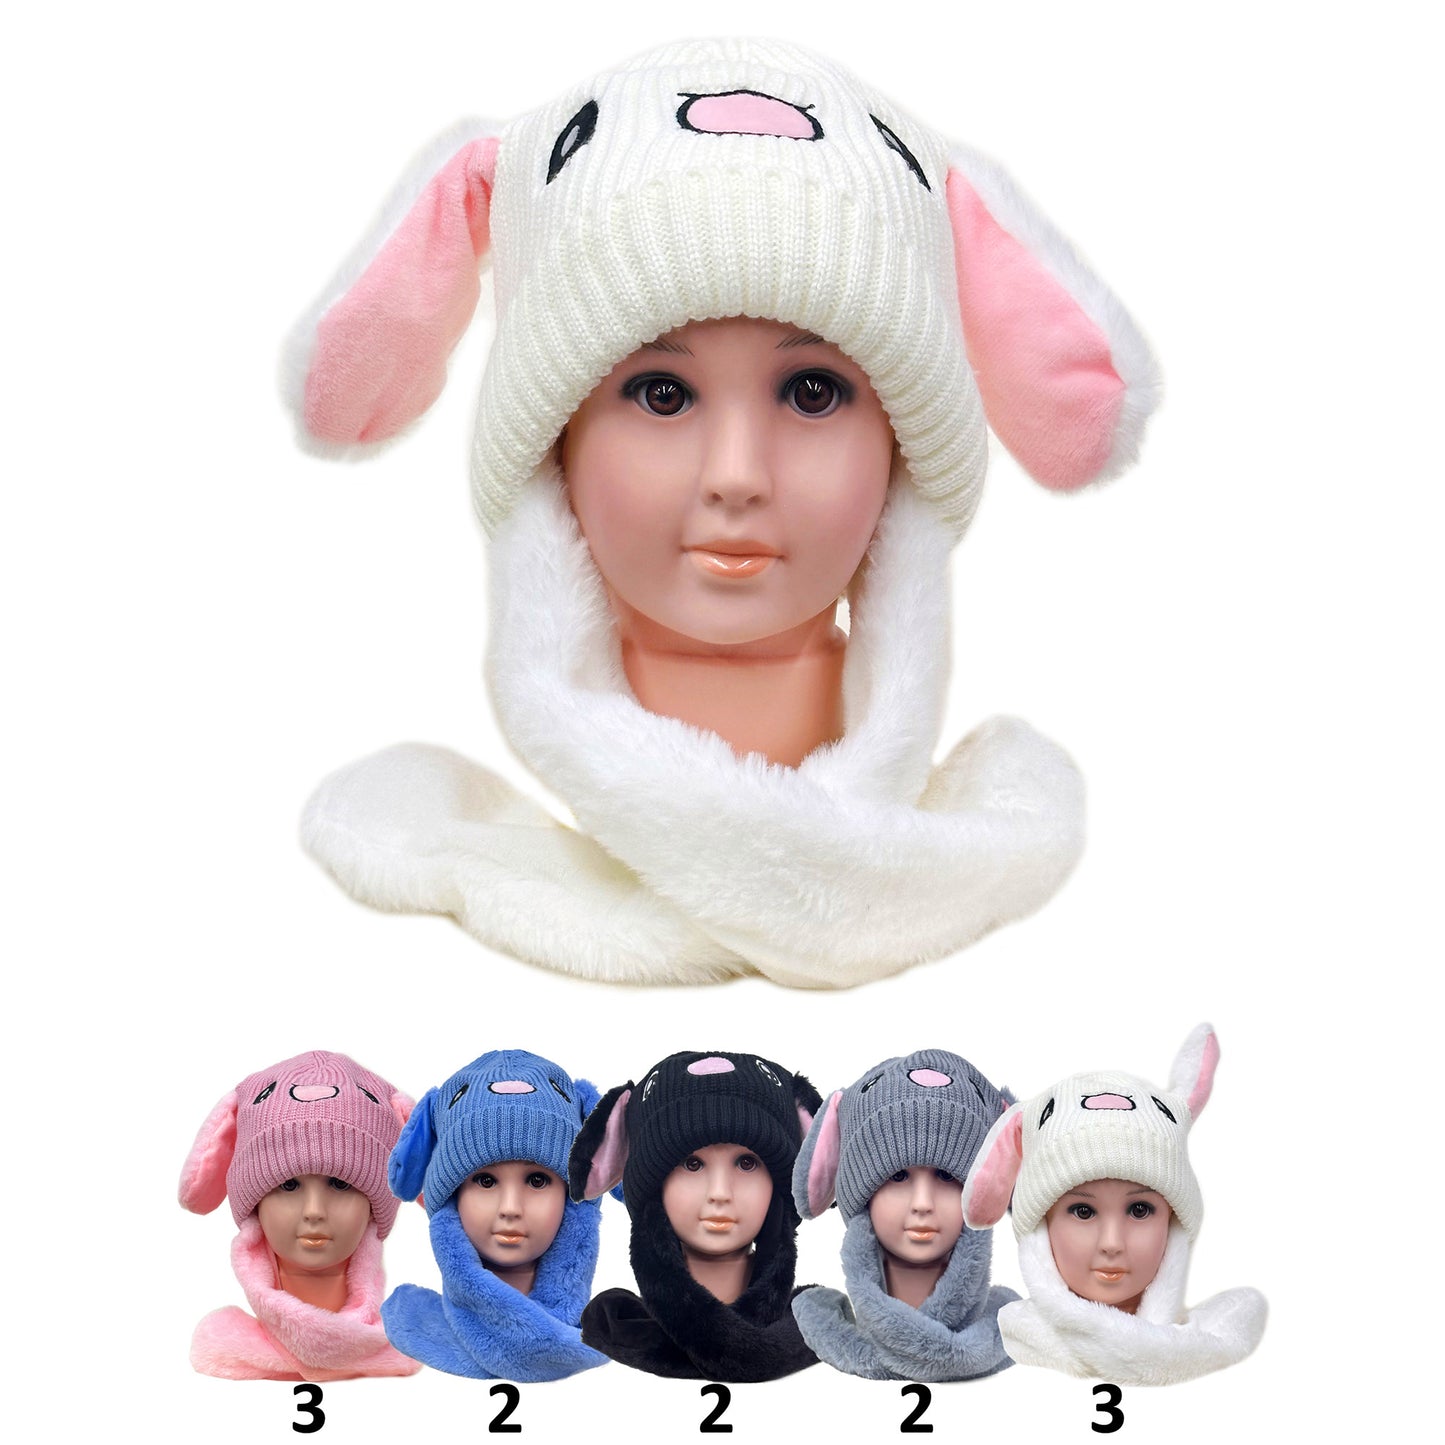 KIDS RABBIT MOVING EAR KNITTED BEANIE 200-16 (12PC)